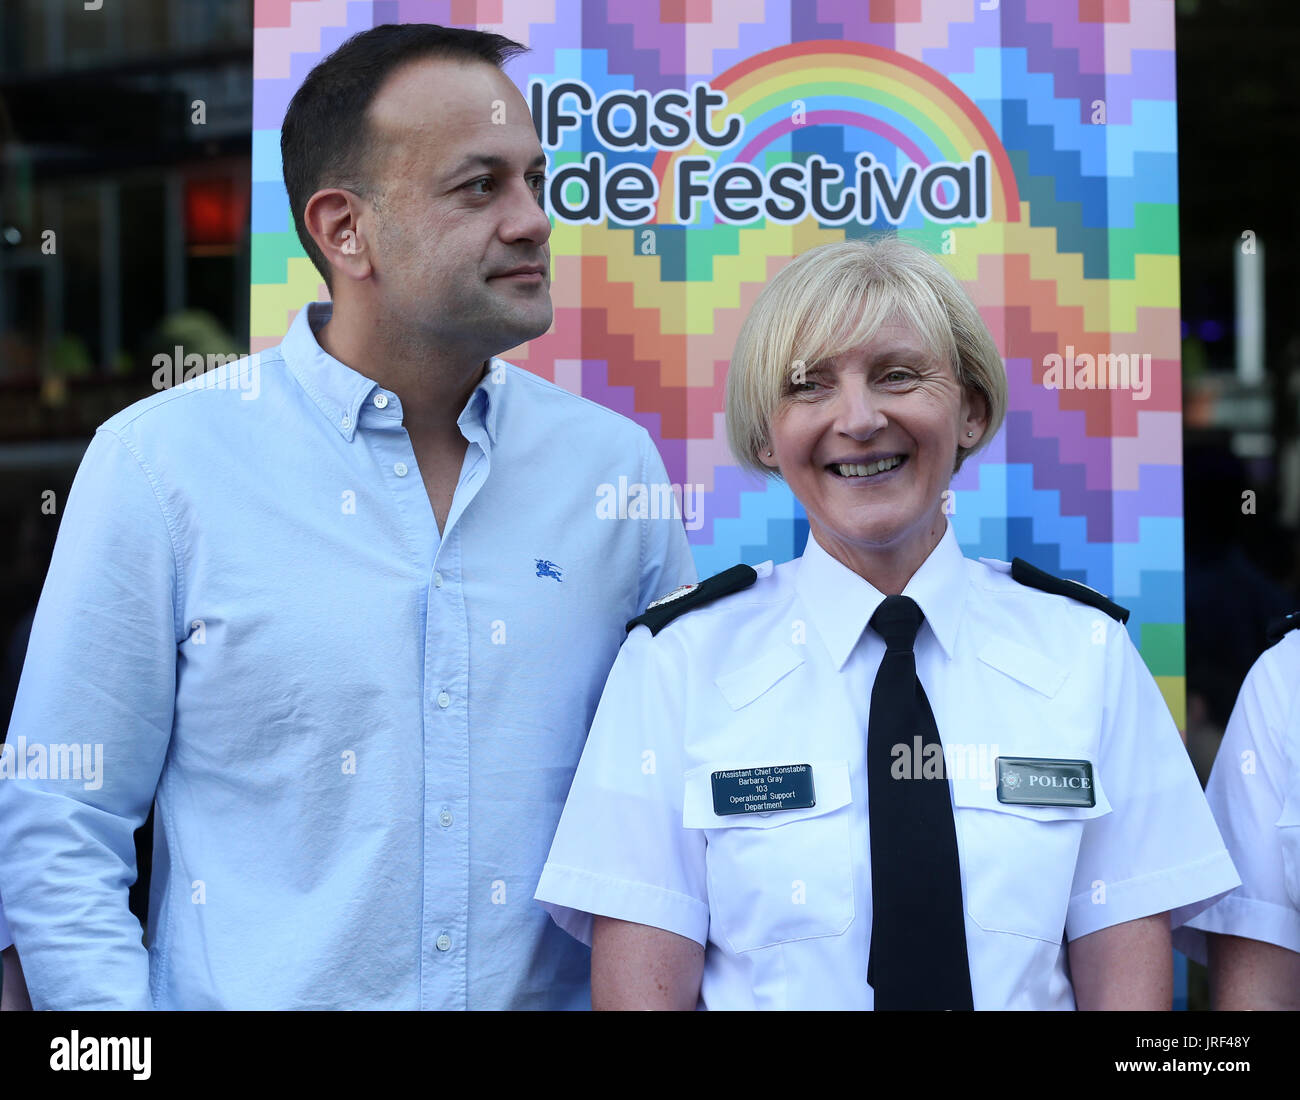 Belfast, Northern Ireland. 5th August 2017. Taoiseach Leo Varadkar poses with members of the Police Service of Northern Ireland LGBT network, including T/Assistant Chief Constable Barbara Gray, alongside members of An Garda Siochana this morning before attending a Pride breakfast event at the Northern Whig bar in Belfast. This is the first time members of the PSNI will be marching in the Pride parade in uniform. Gardai have also been gieven permission to wear their uniforms in the parade. Credit : Laura Hutton/Alamy Live News. Stock Photo